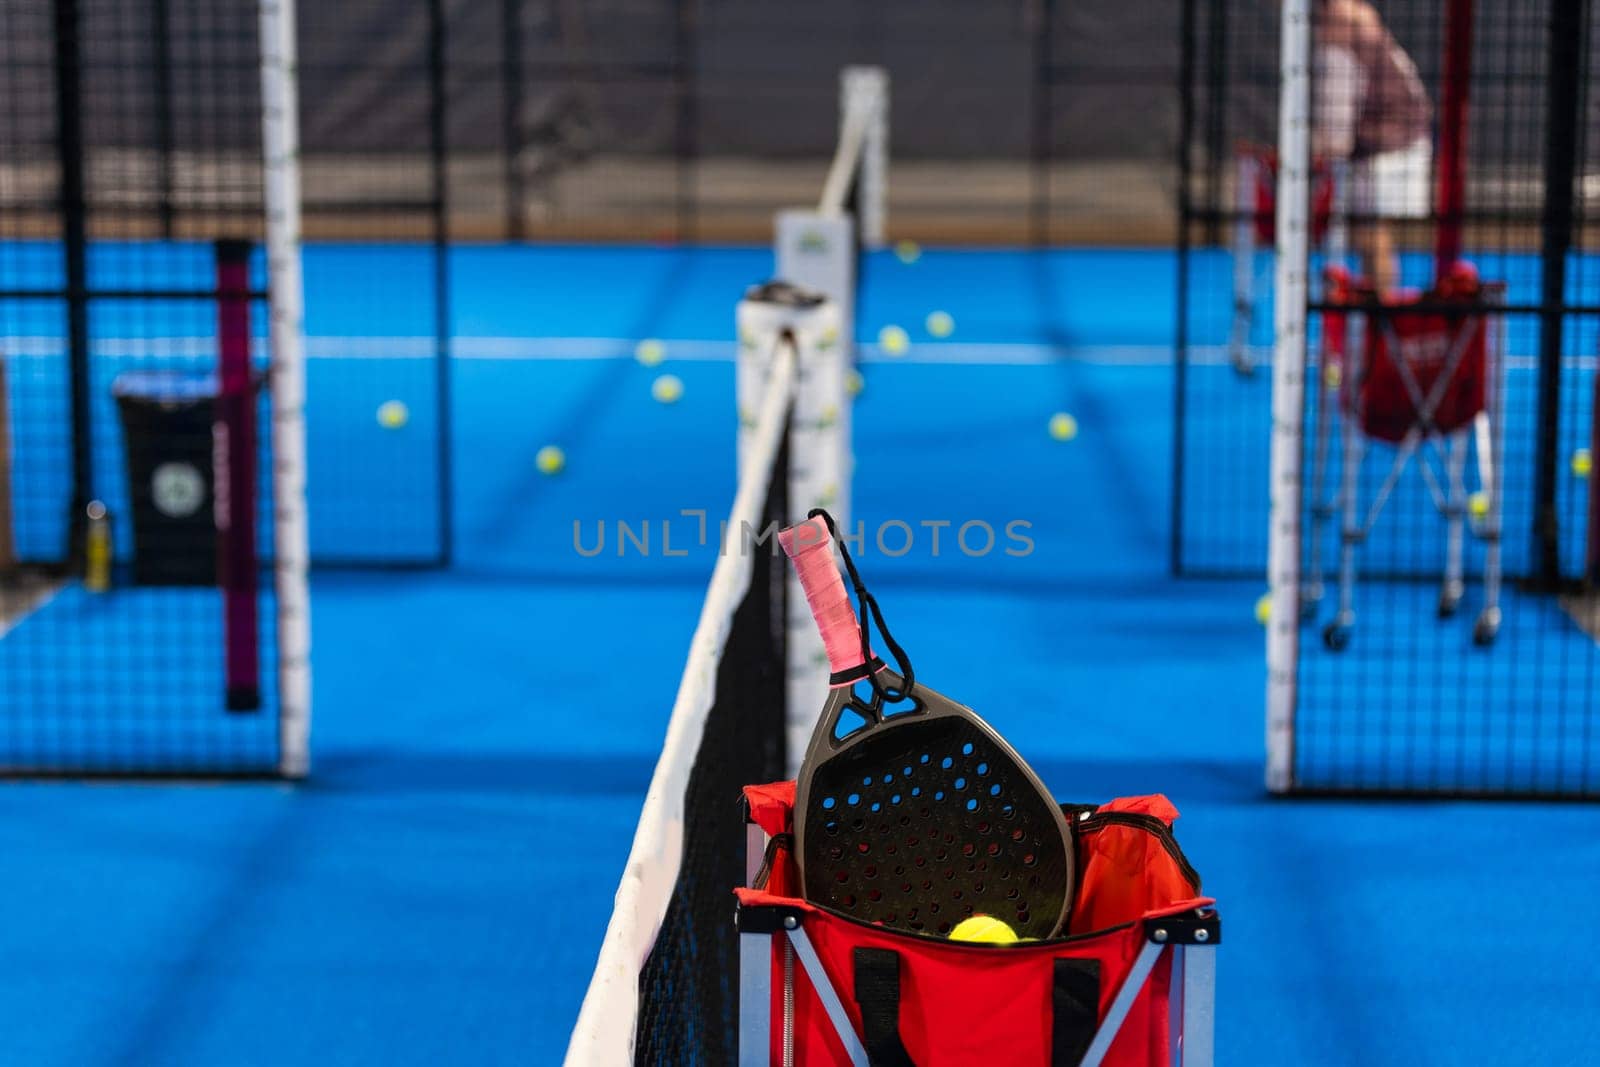 balls near the net of a blue padel tennis court by Andelov13